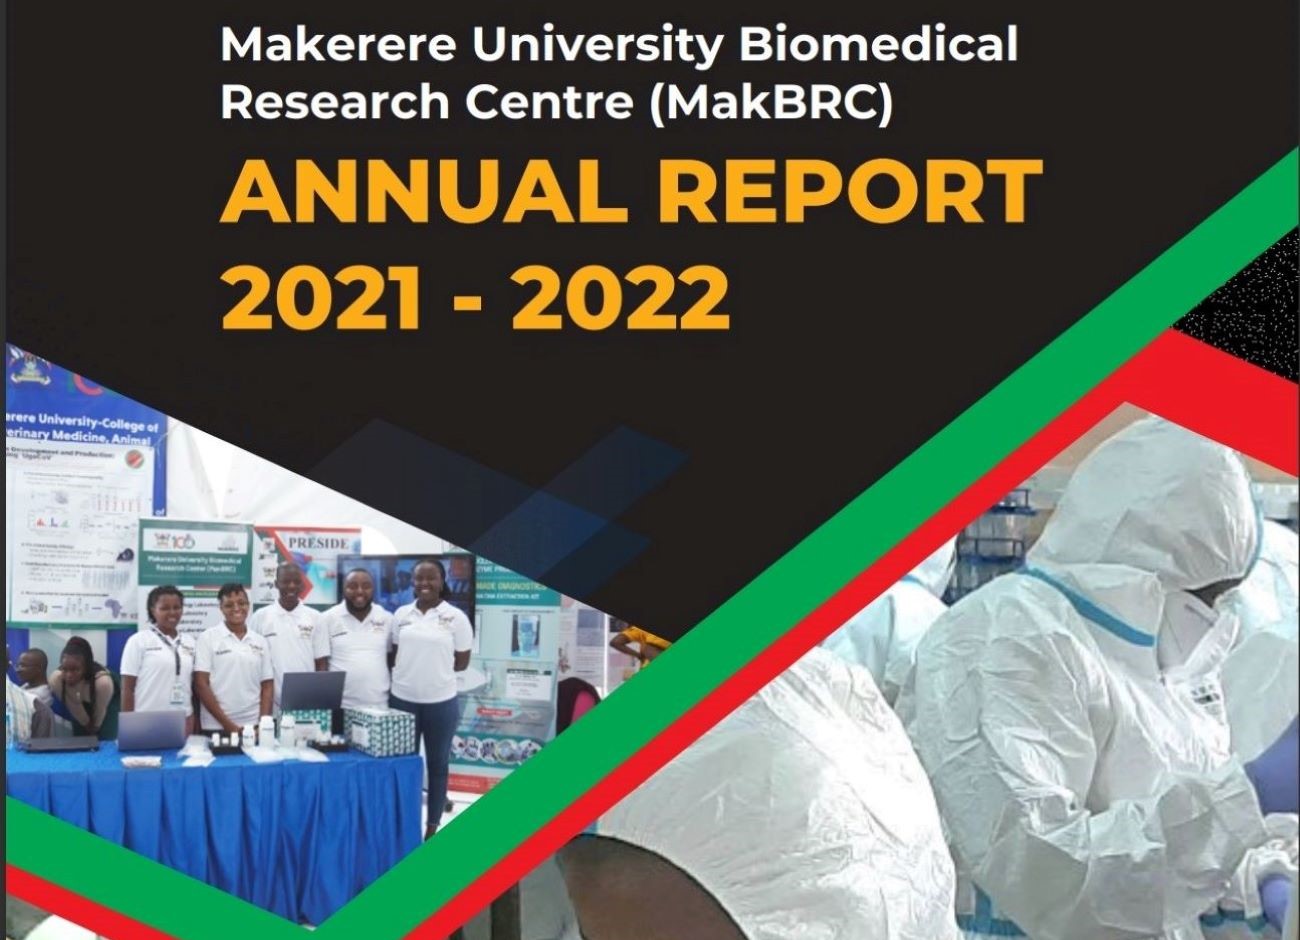 Cover page of the Makerere University Biomedical Research Centre (MakBRC) Annual Report 2021-2022.